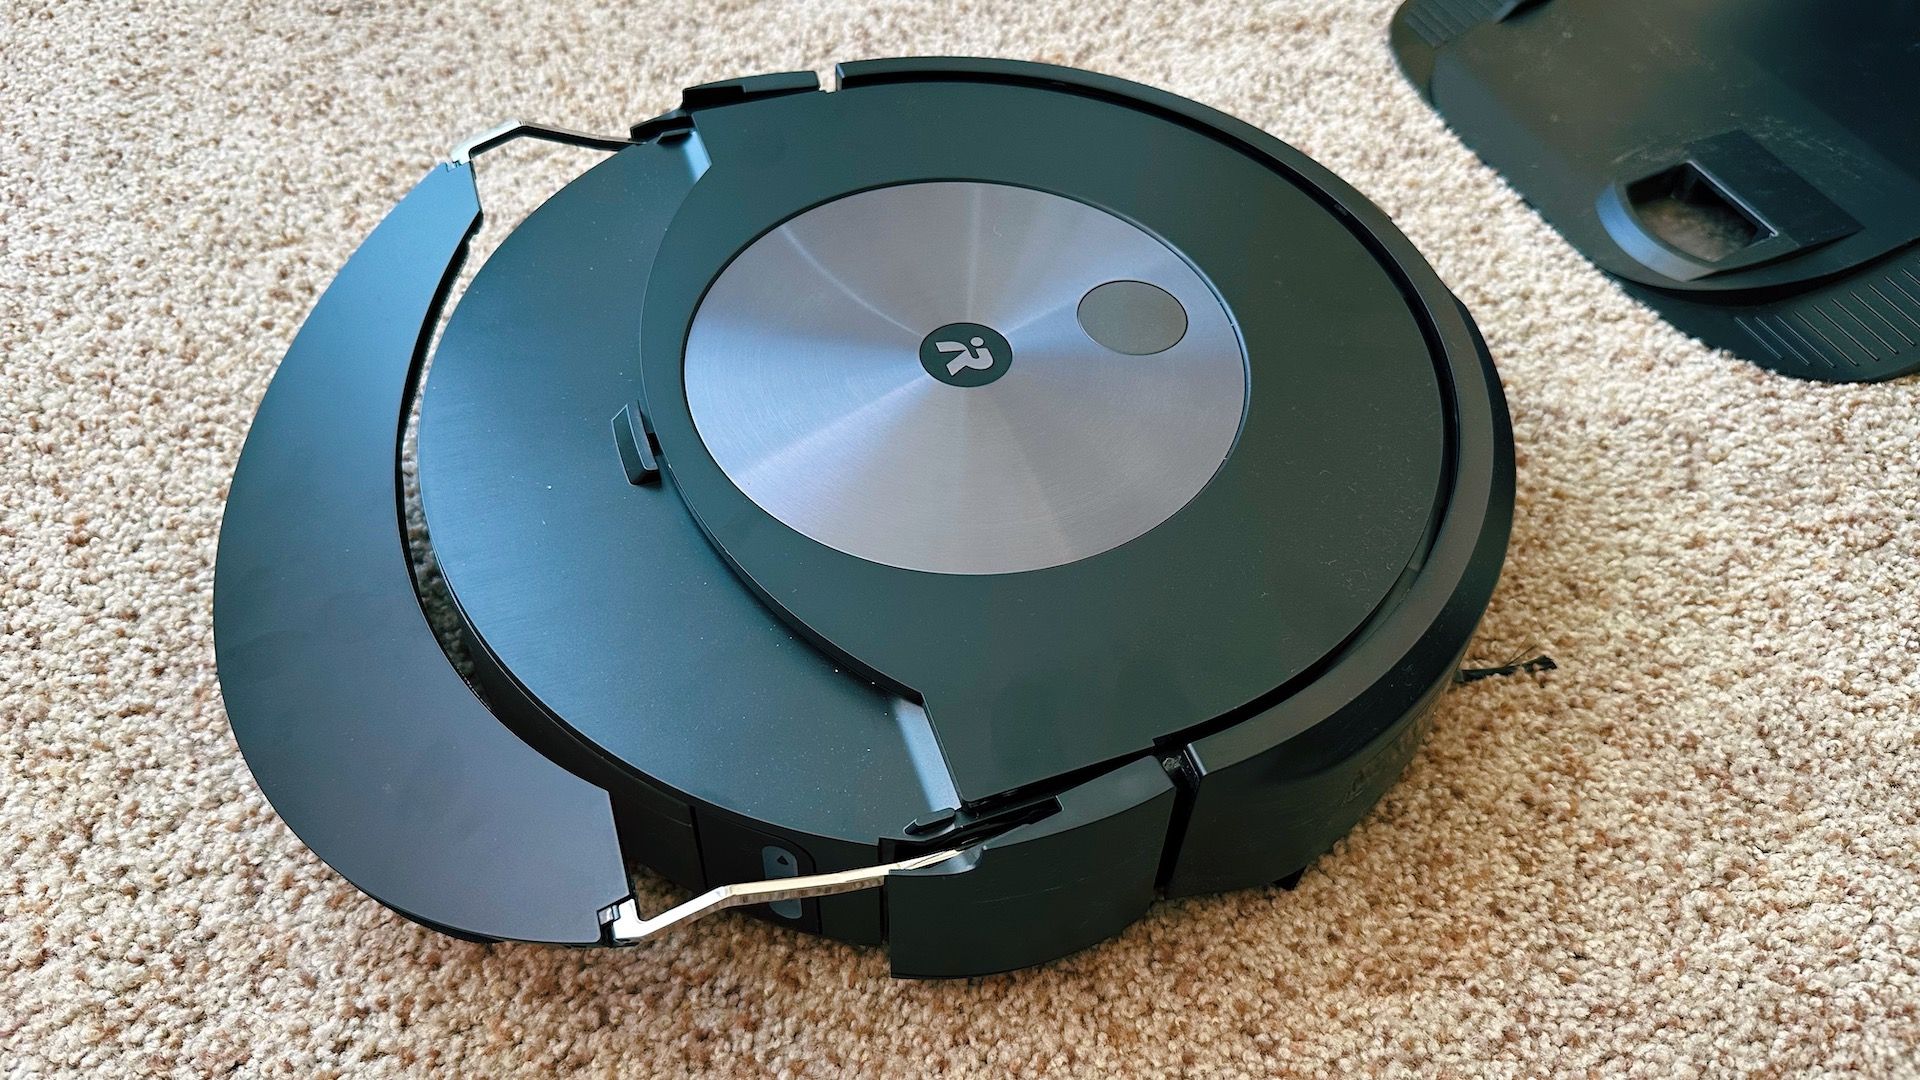 Roomba j7+ moving its mop pad into position